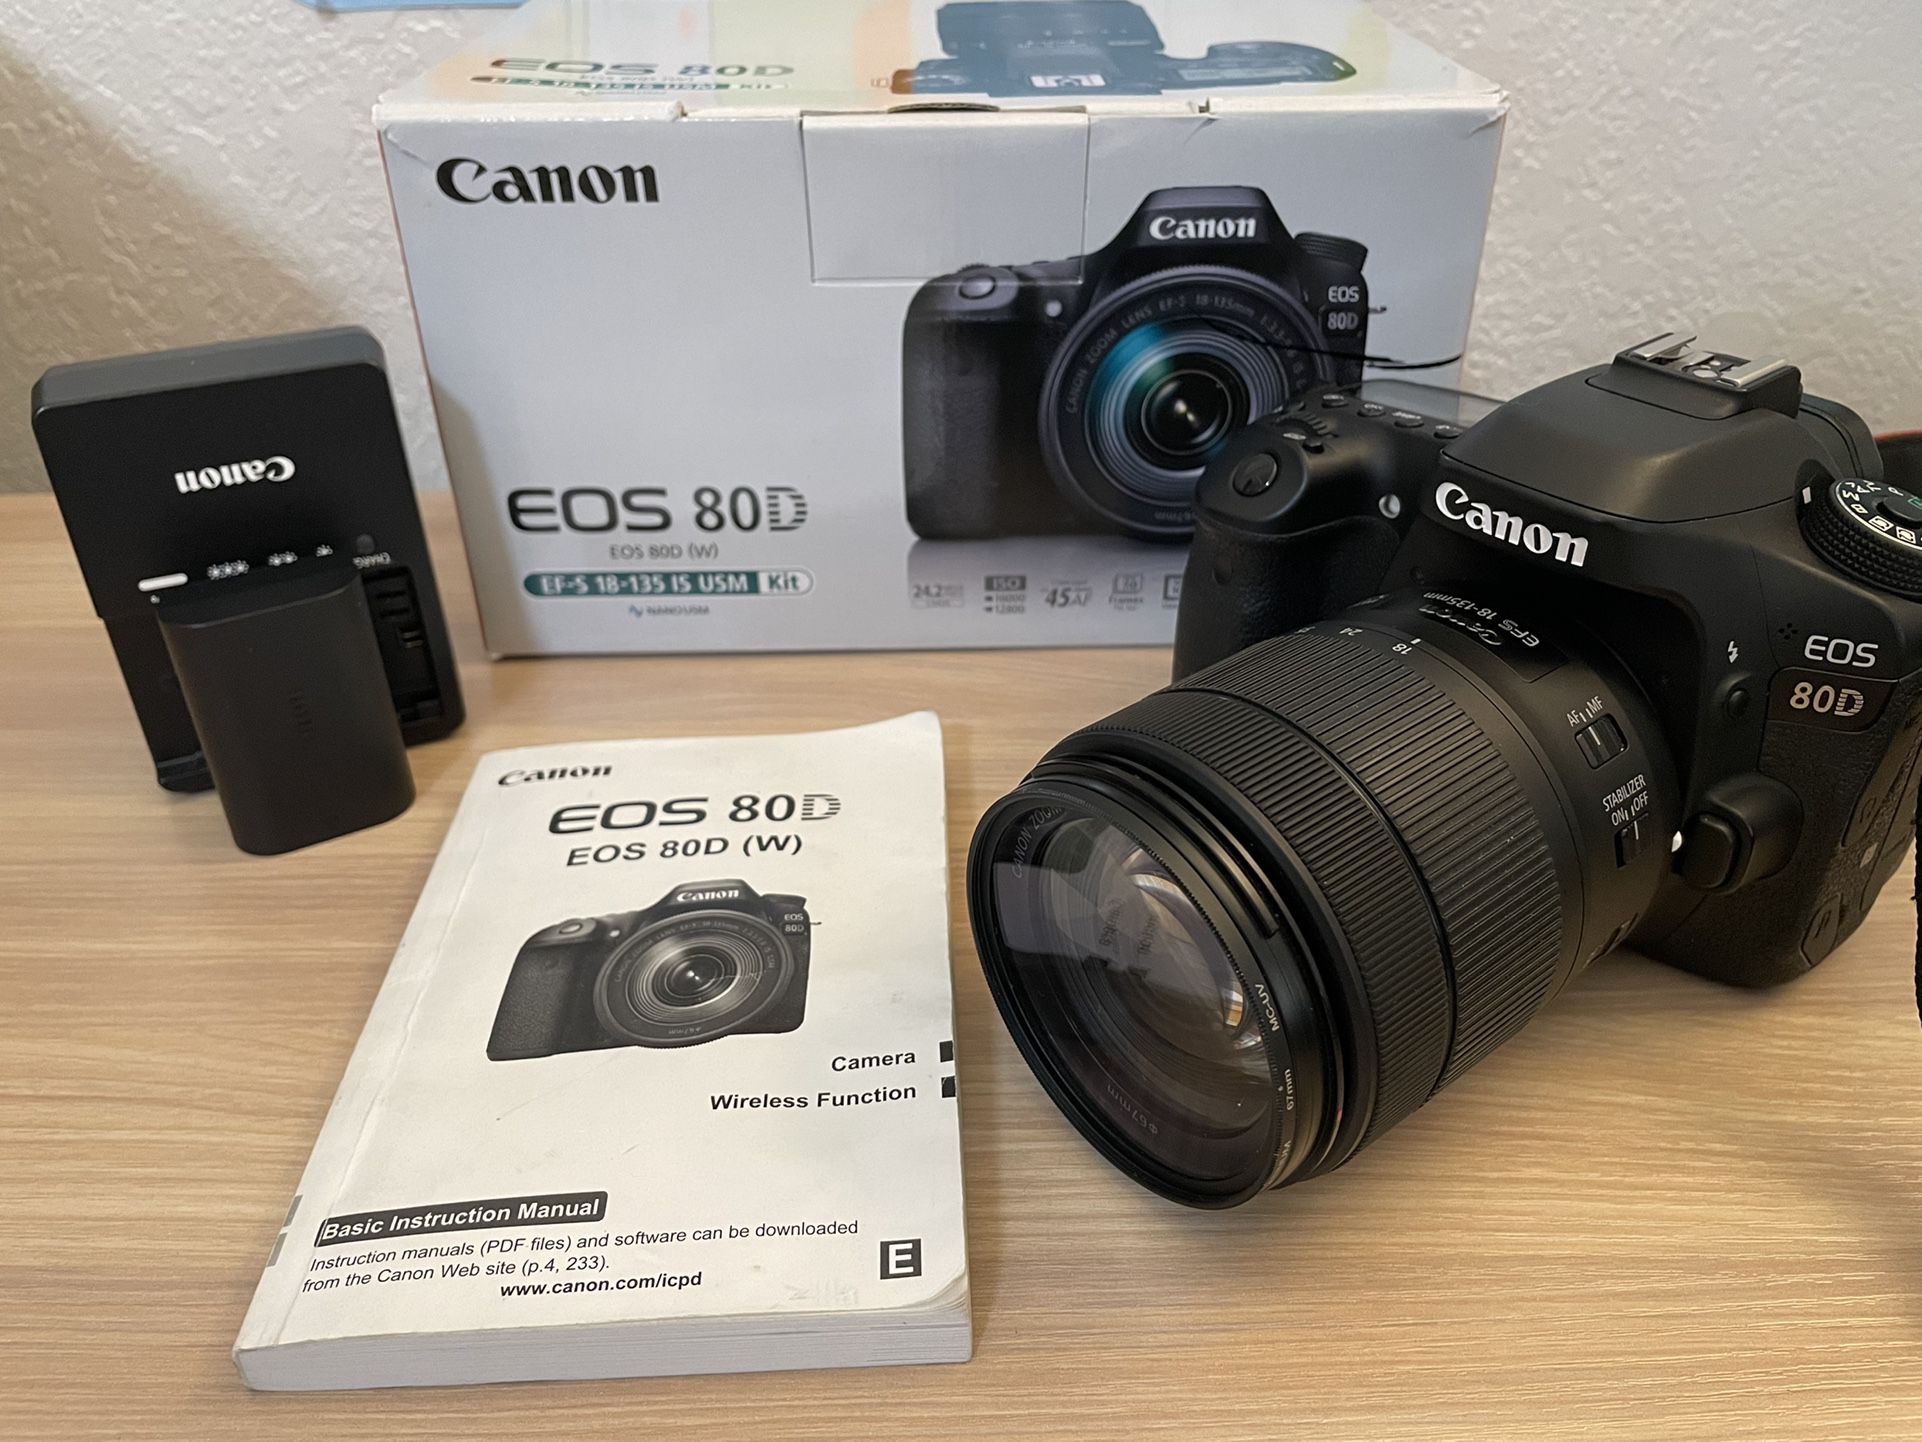 Canon Digital SLR EOS 80D and 18-135mm f/3.5-5.6 USM Lens with 24.2 Megapixel